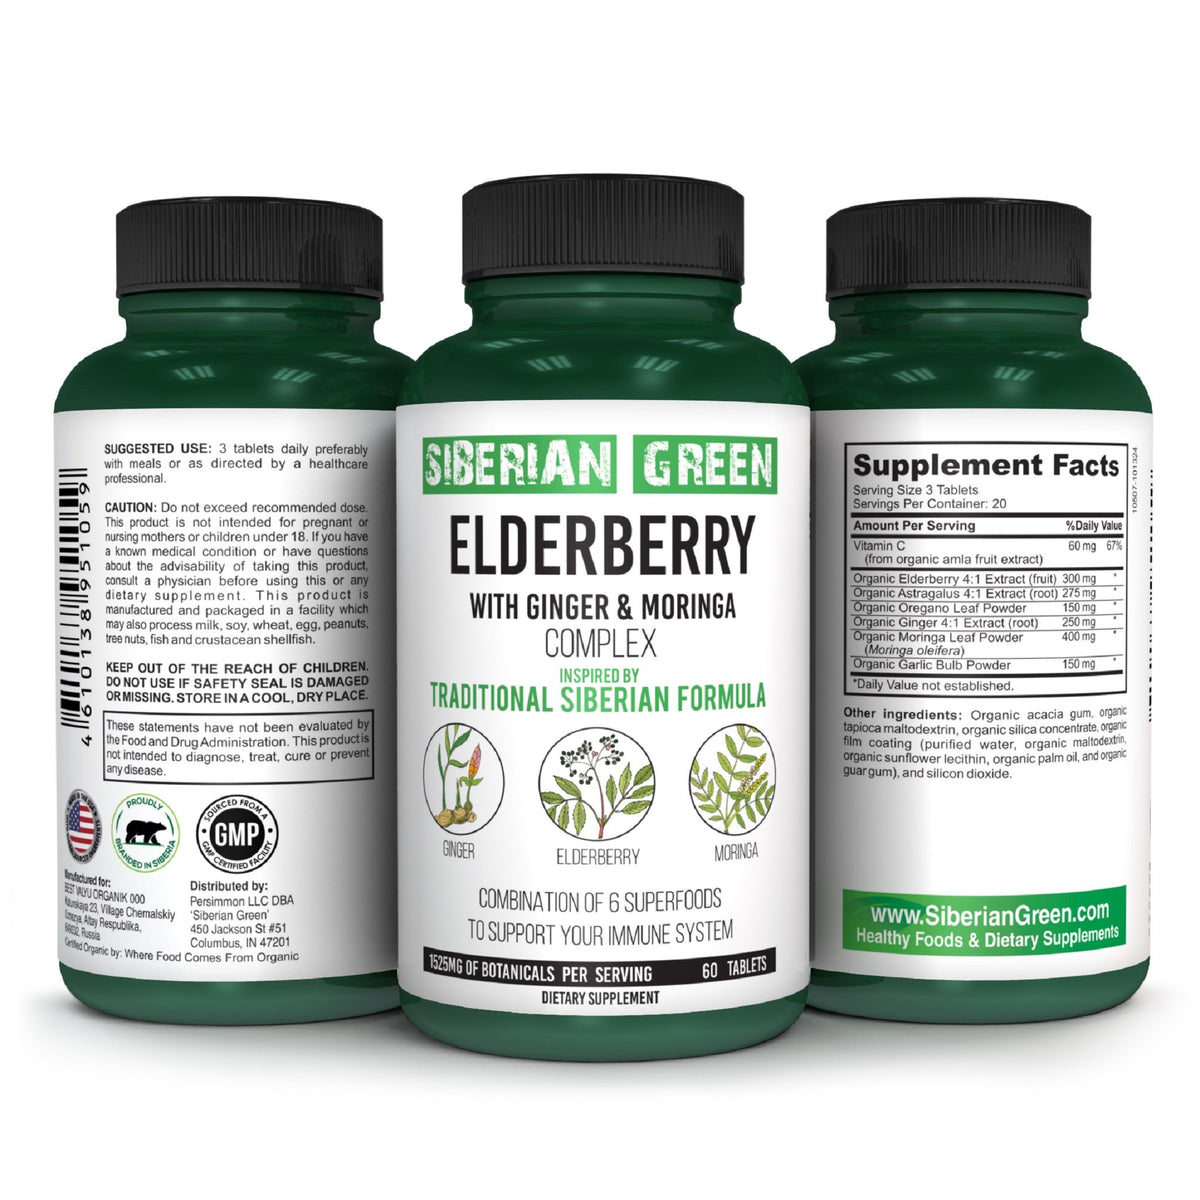 Siberian Green Elderberry with Ginger &amp; Moringa Complex - 60 Tablets – Traditional Siberian Formula Superfoods to Support Immune System